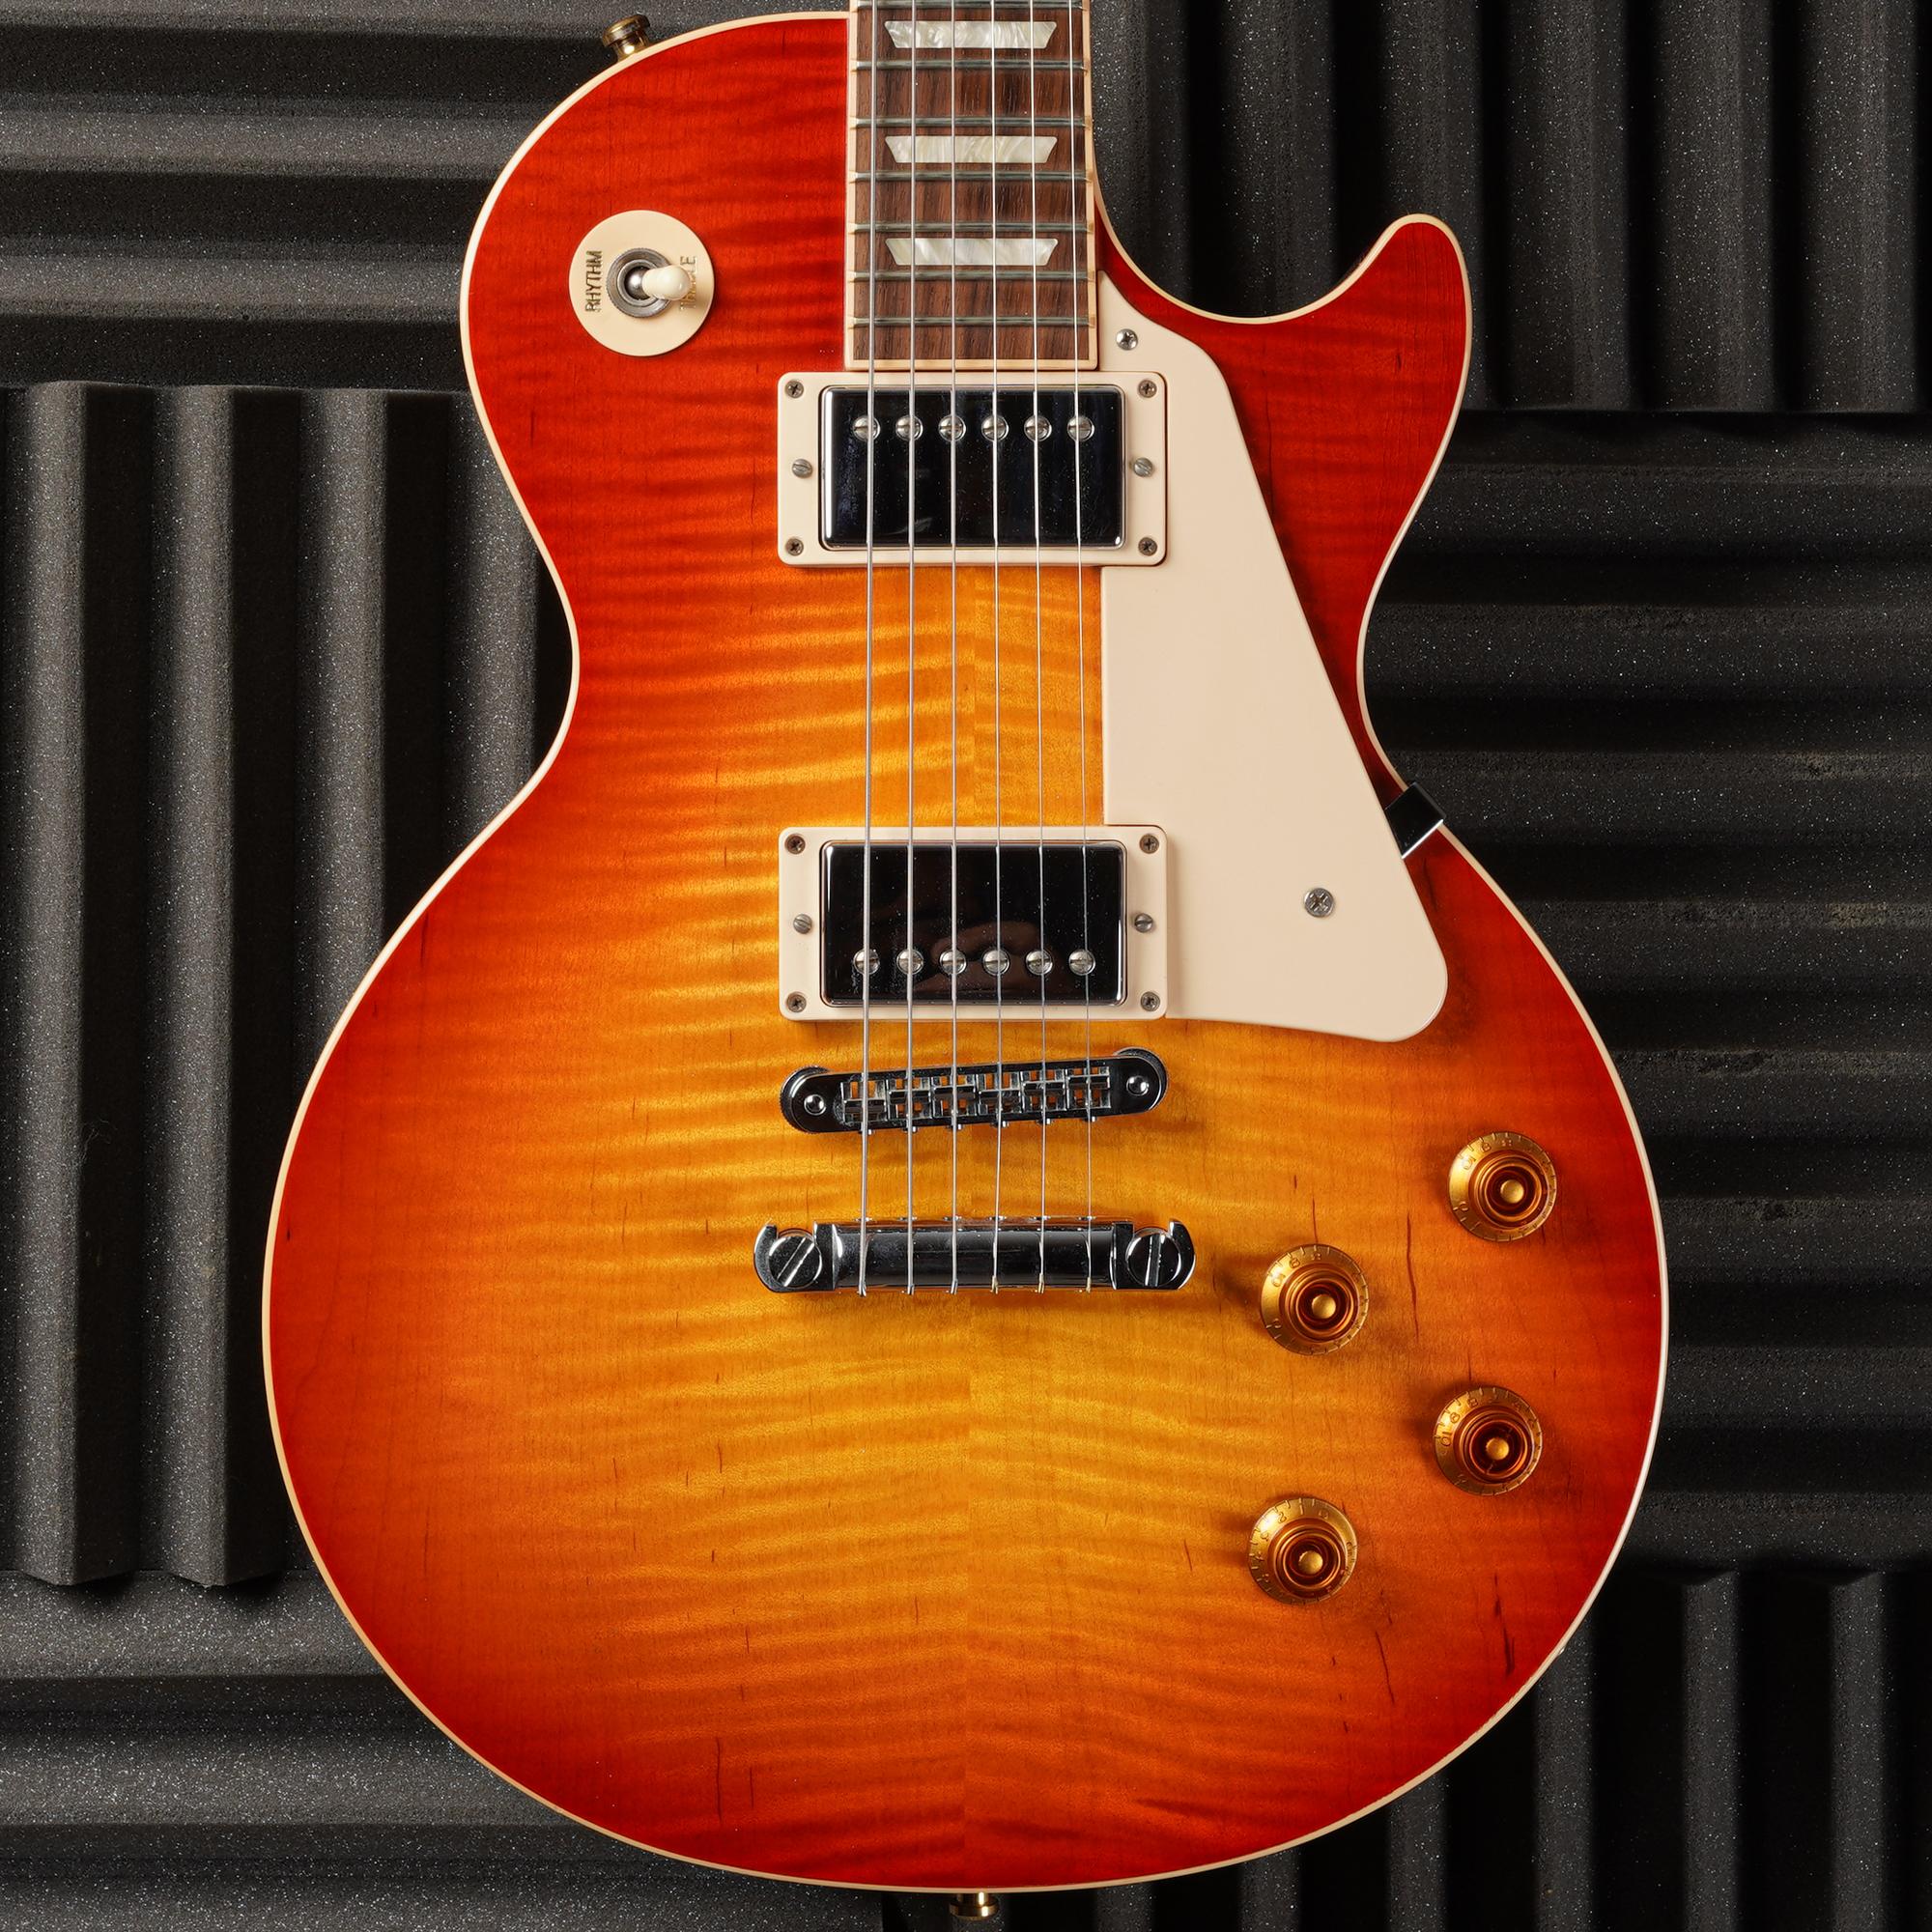 Gibson Les Paul Standard with Flame Maple Top 2013 Heritage Cherry Sunburst